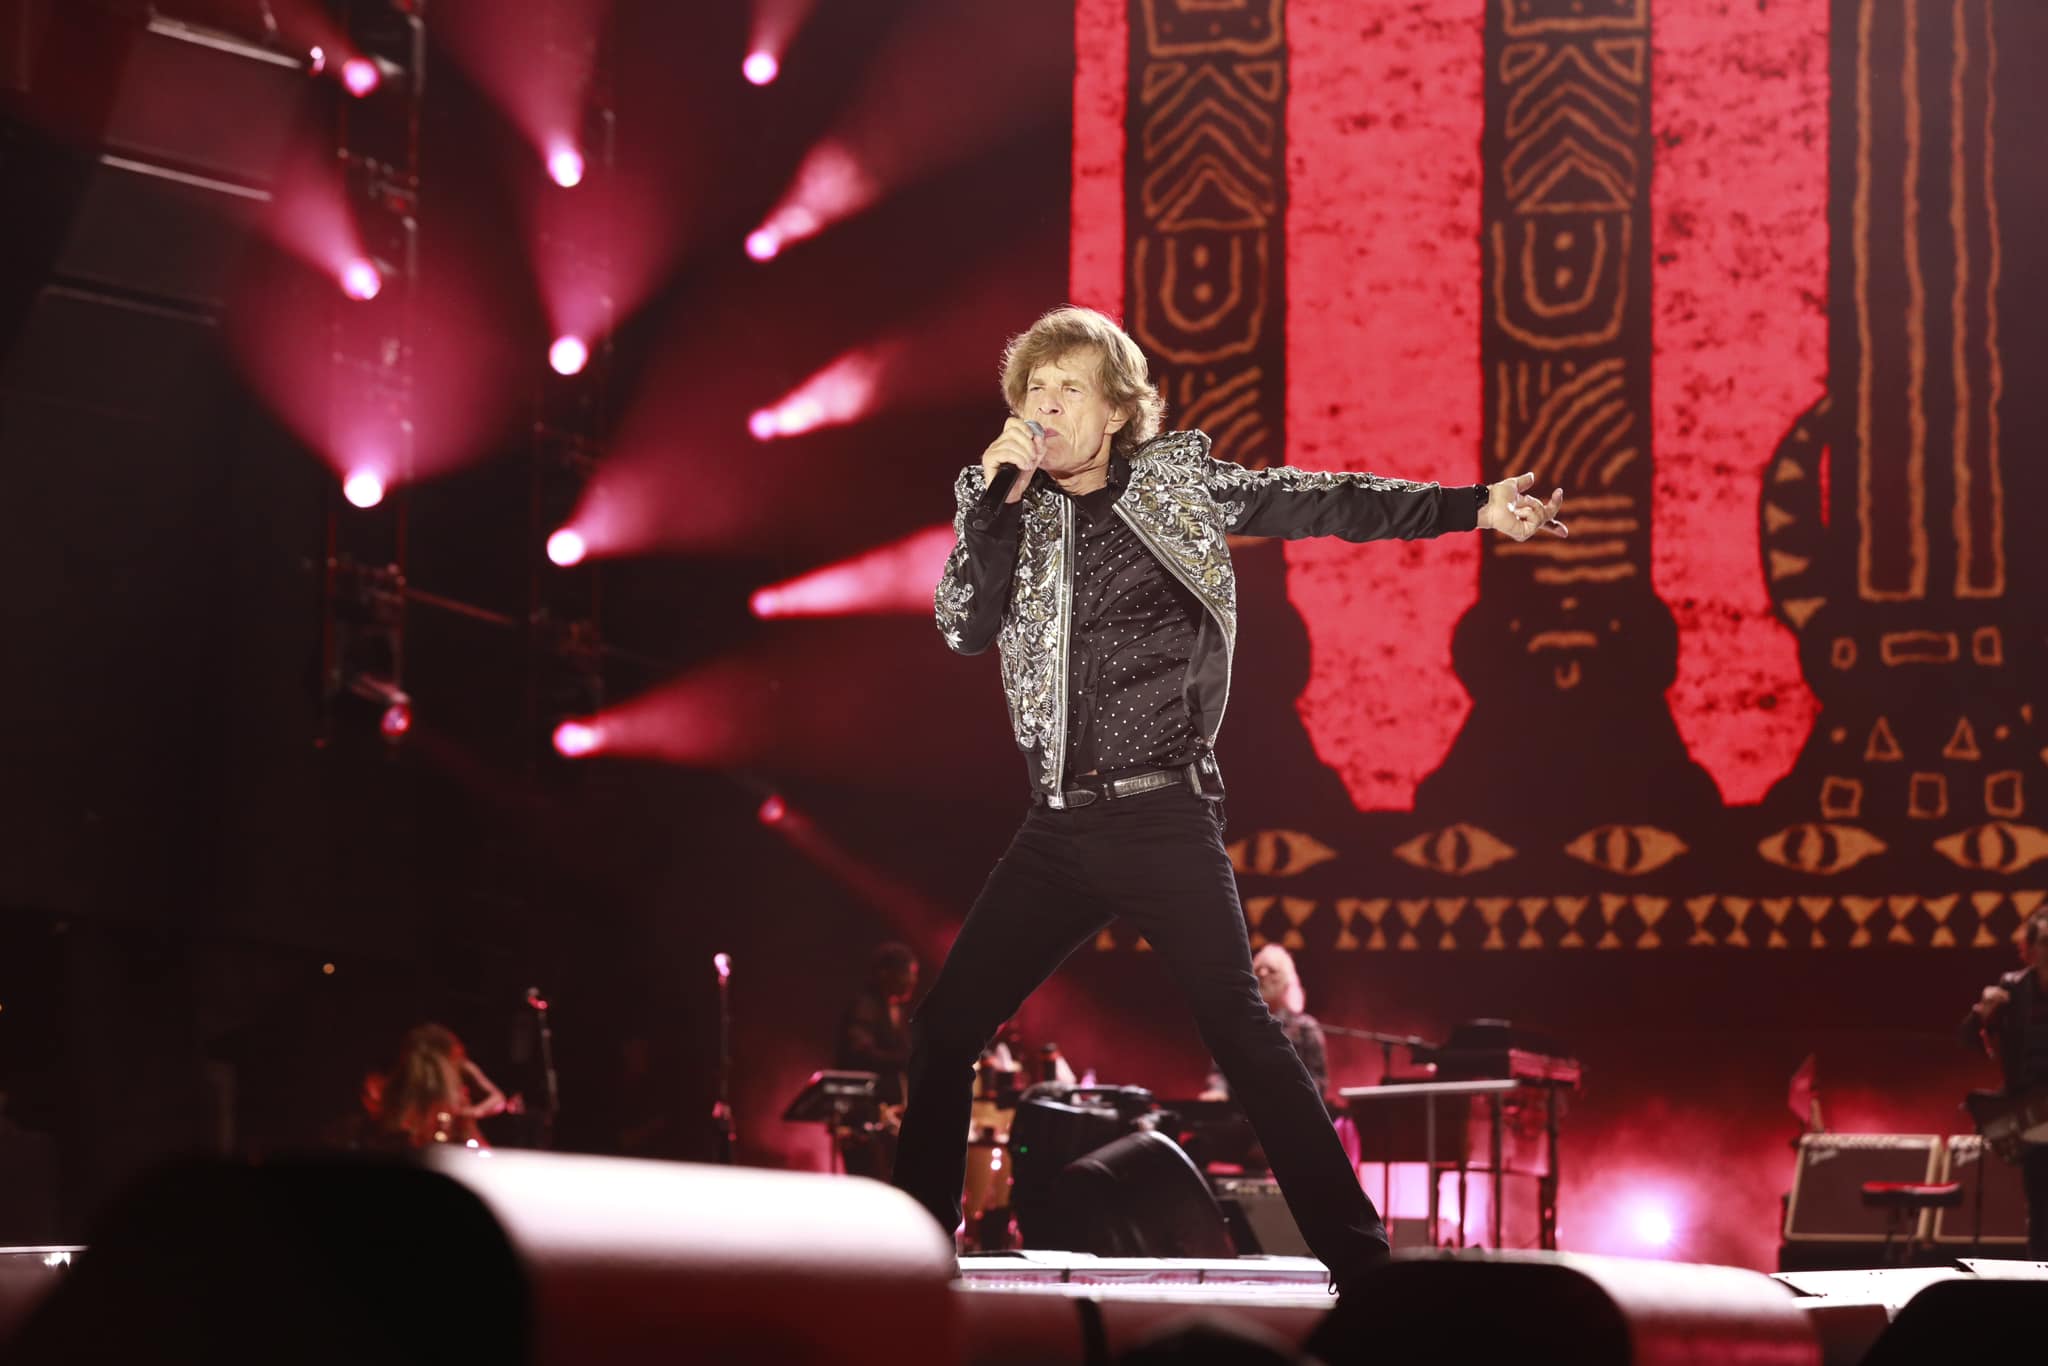 The Rolling Stones Shake Things Up with “Bitch,” “Midnight Rambler” in